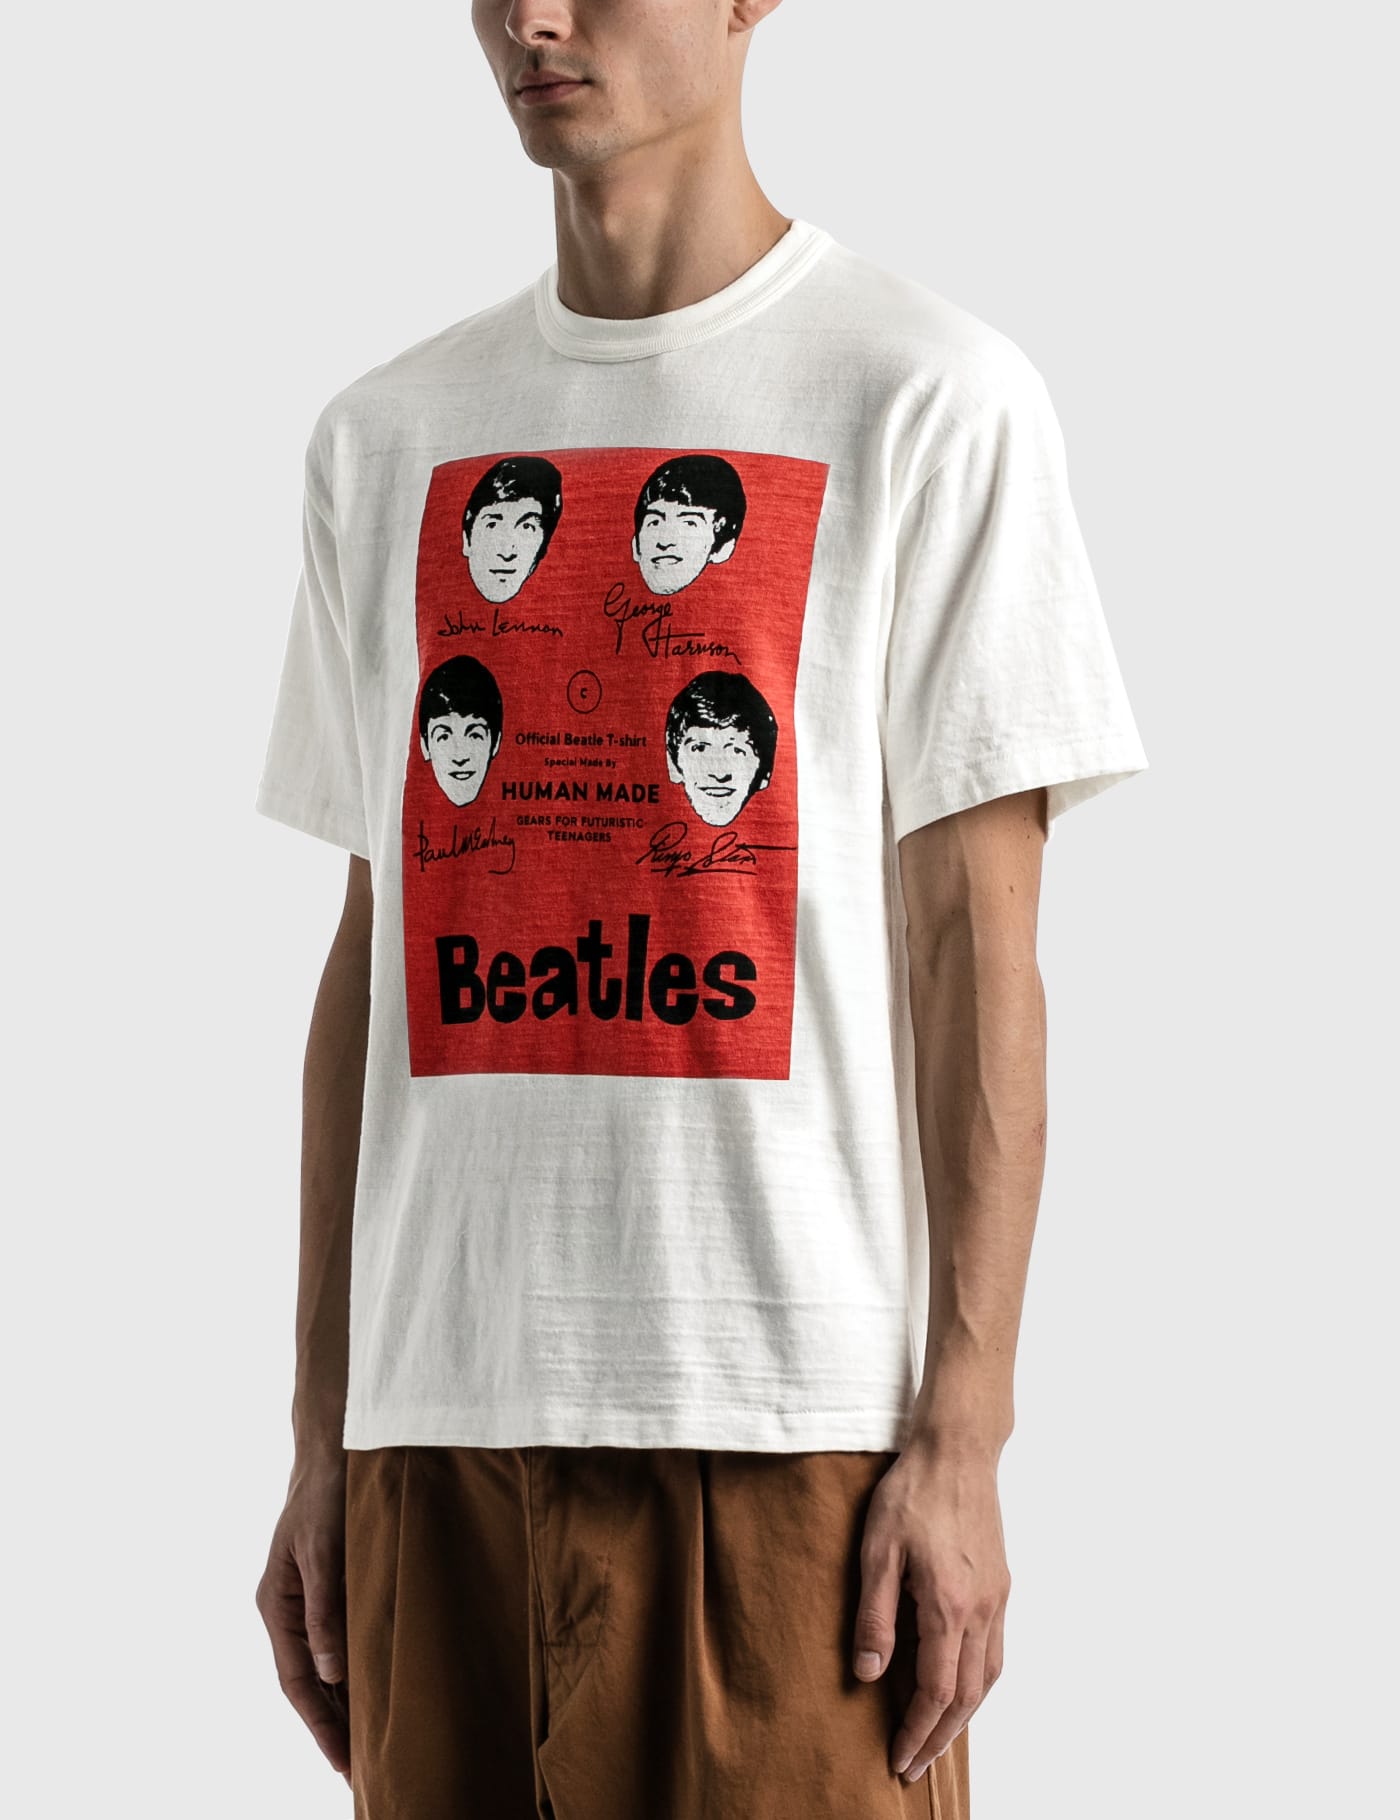 Human Made - Beatles T-shirt | HBX - Globally Curated Fashion and 